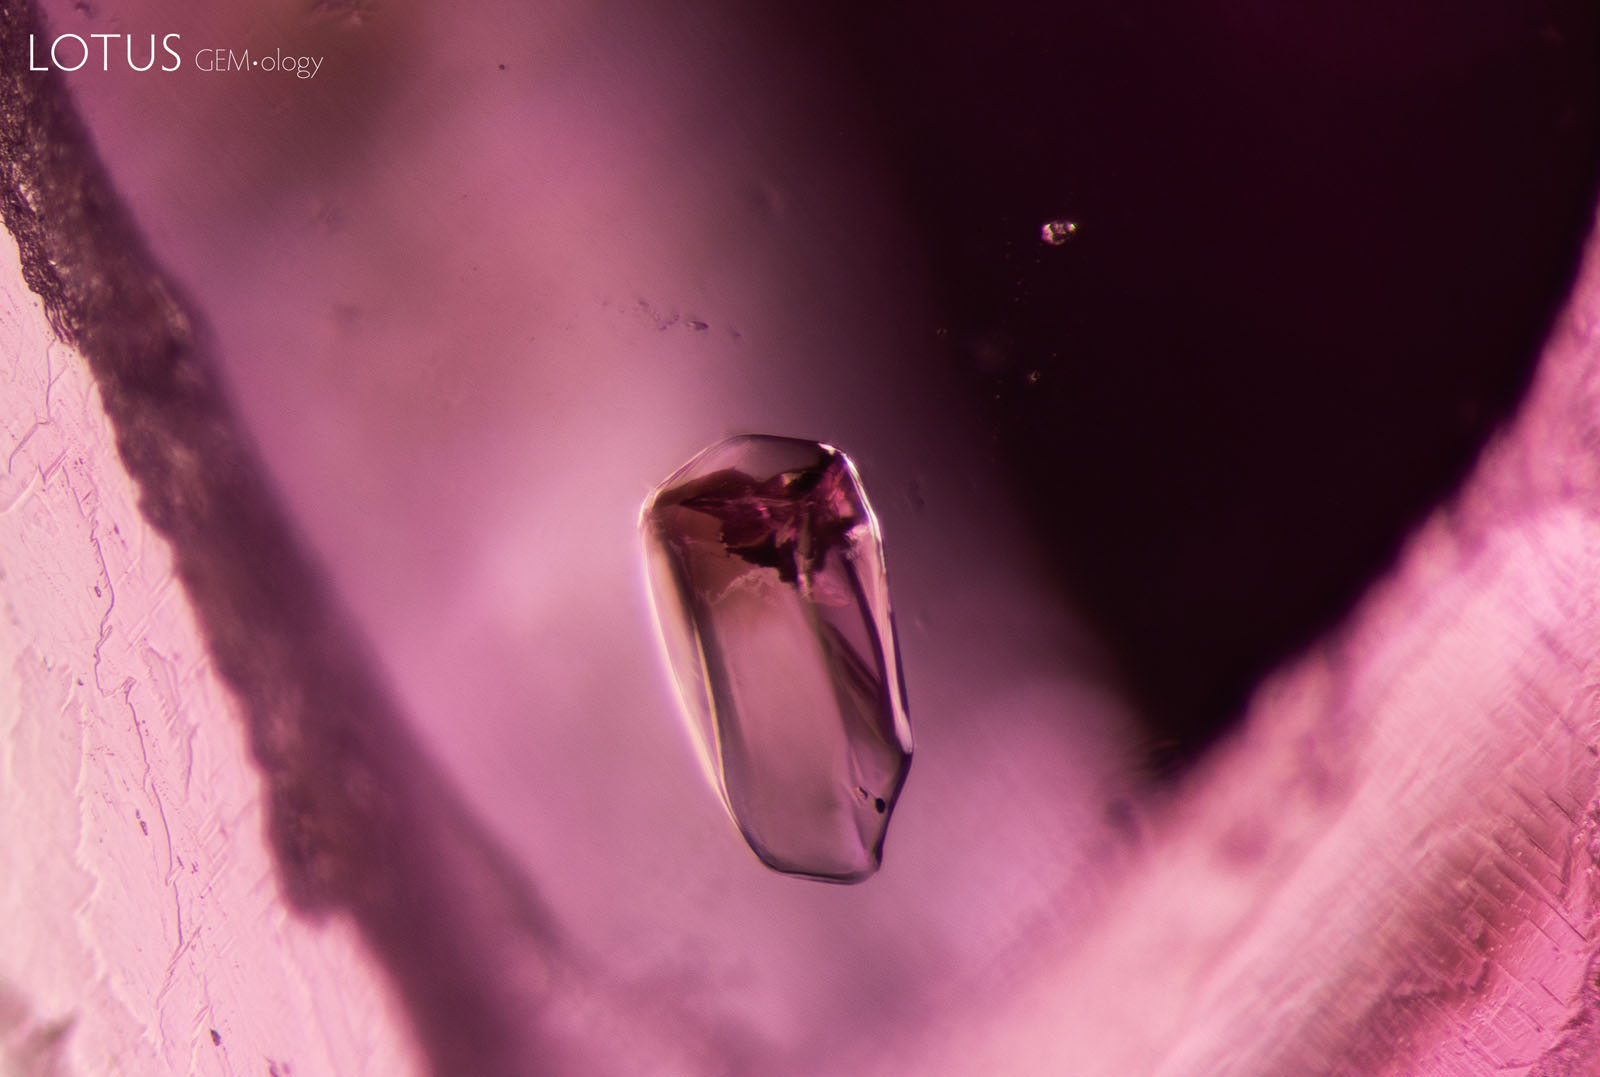 (Unheated) Sample 39 shows a spinel crystal in the center, with a small crystal to the top right.